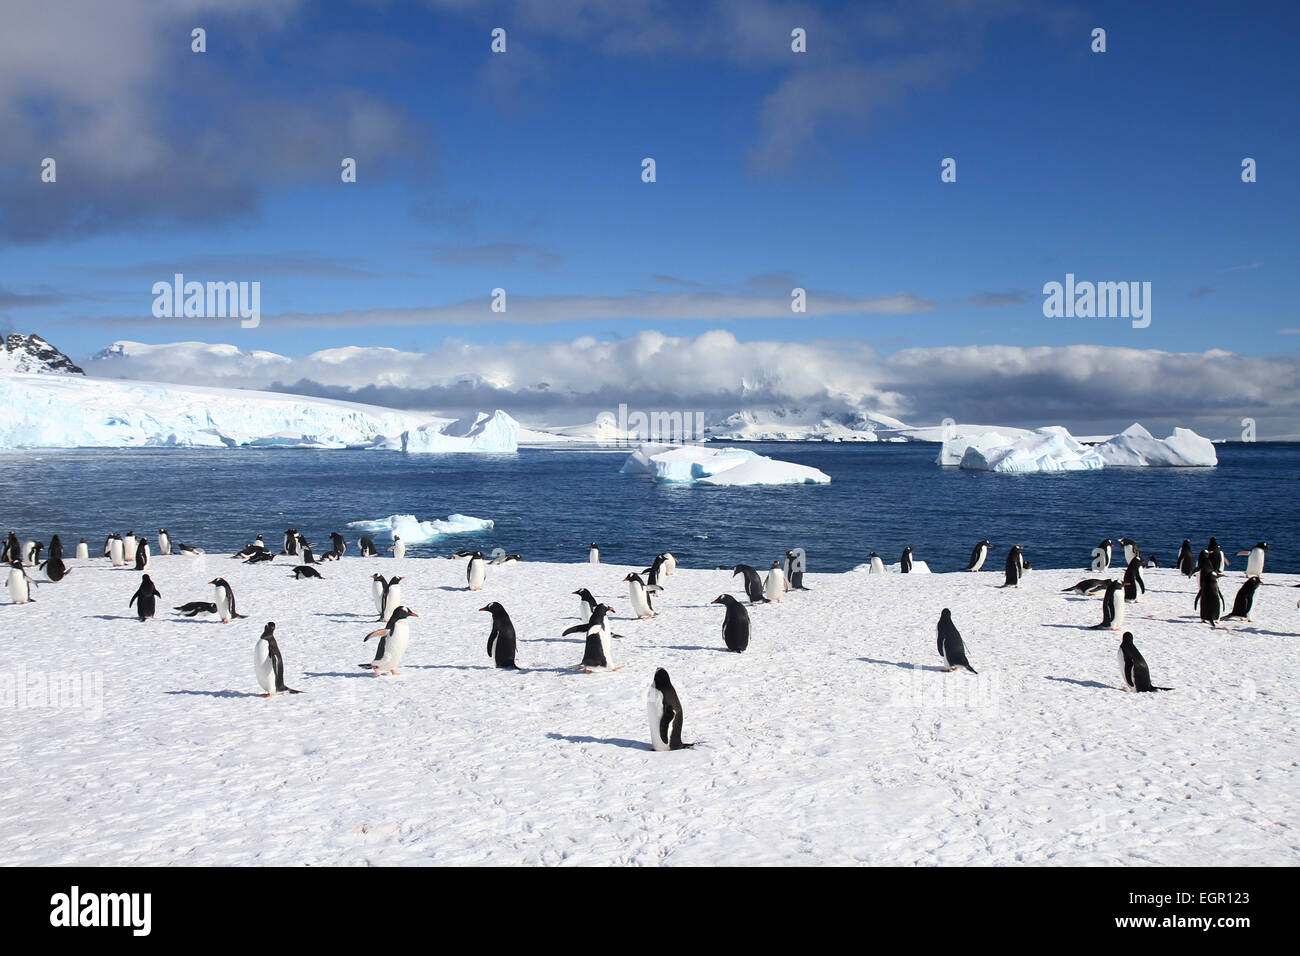 Gentoo penguins (Pygoscelis papua). Gentoo penguins grow to lengths of 70 centimetres and live in large colonies on Antarctic is Stock Photo